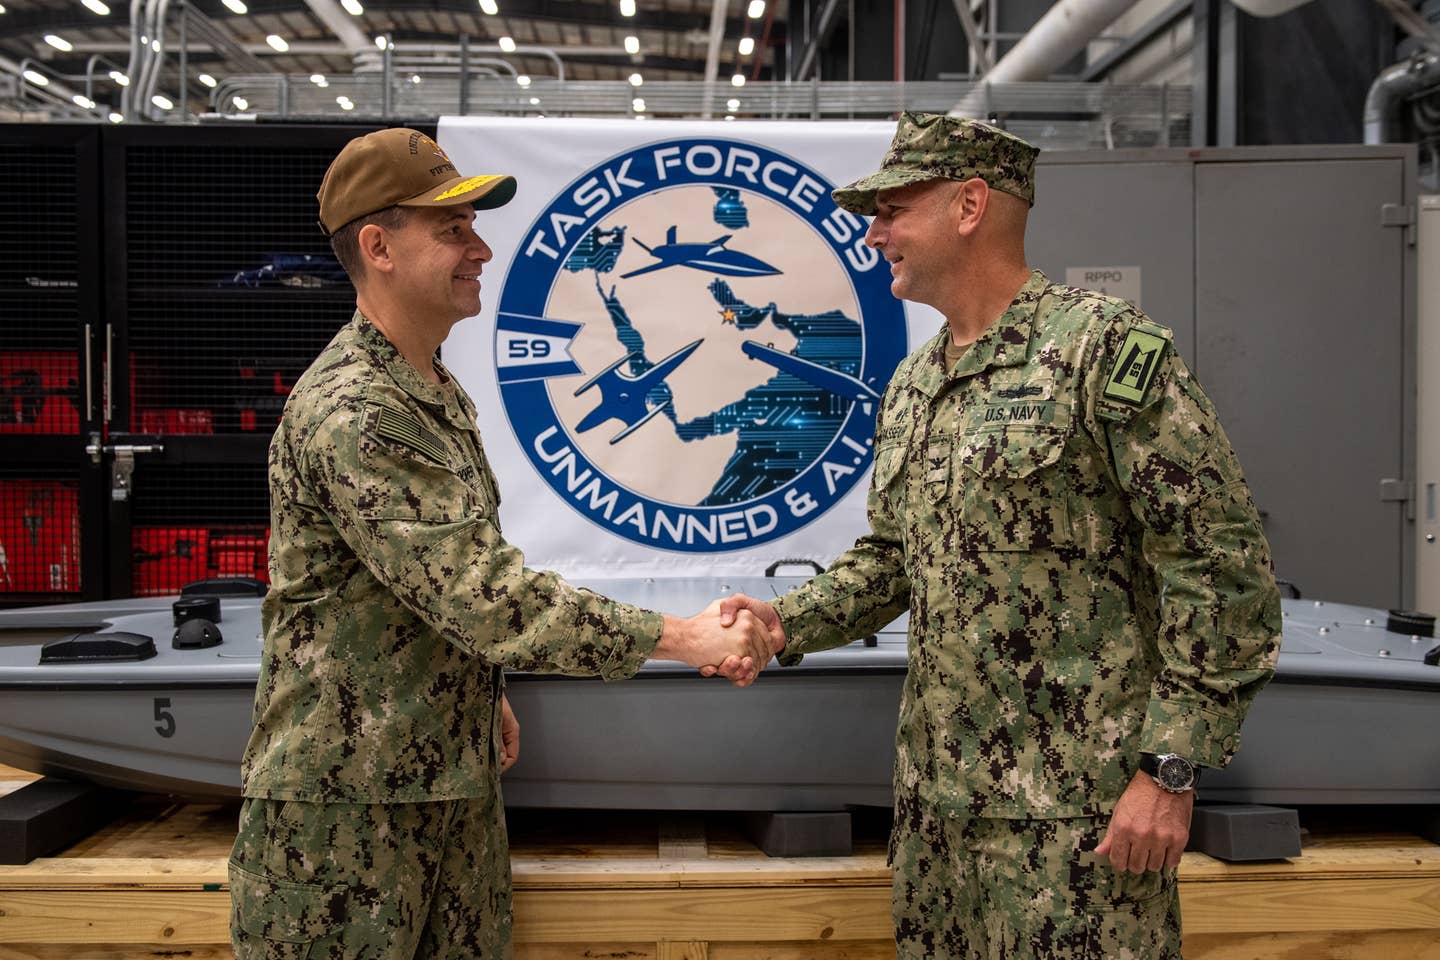 Vice Adm. Brad Cooper, left, commander of NAVCENT, U.S. 5th Fleet and Combined Maritime Forces, shakes hands with Capt. Michael D. Brasseur, commodore of Task Force during a commissioning ceremony for the unit. <em>Credit: U.S. Navy photo by Mass Communication Specialist 2nd Class Dawson Roth</em>